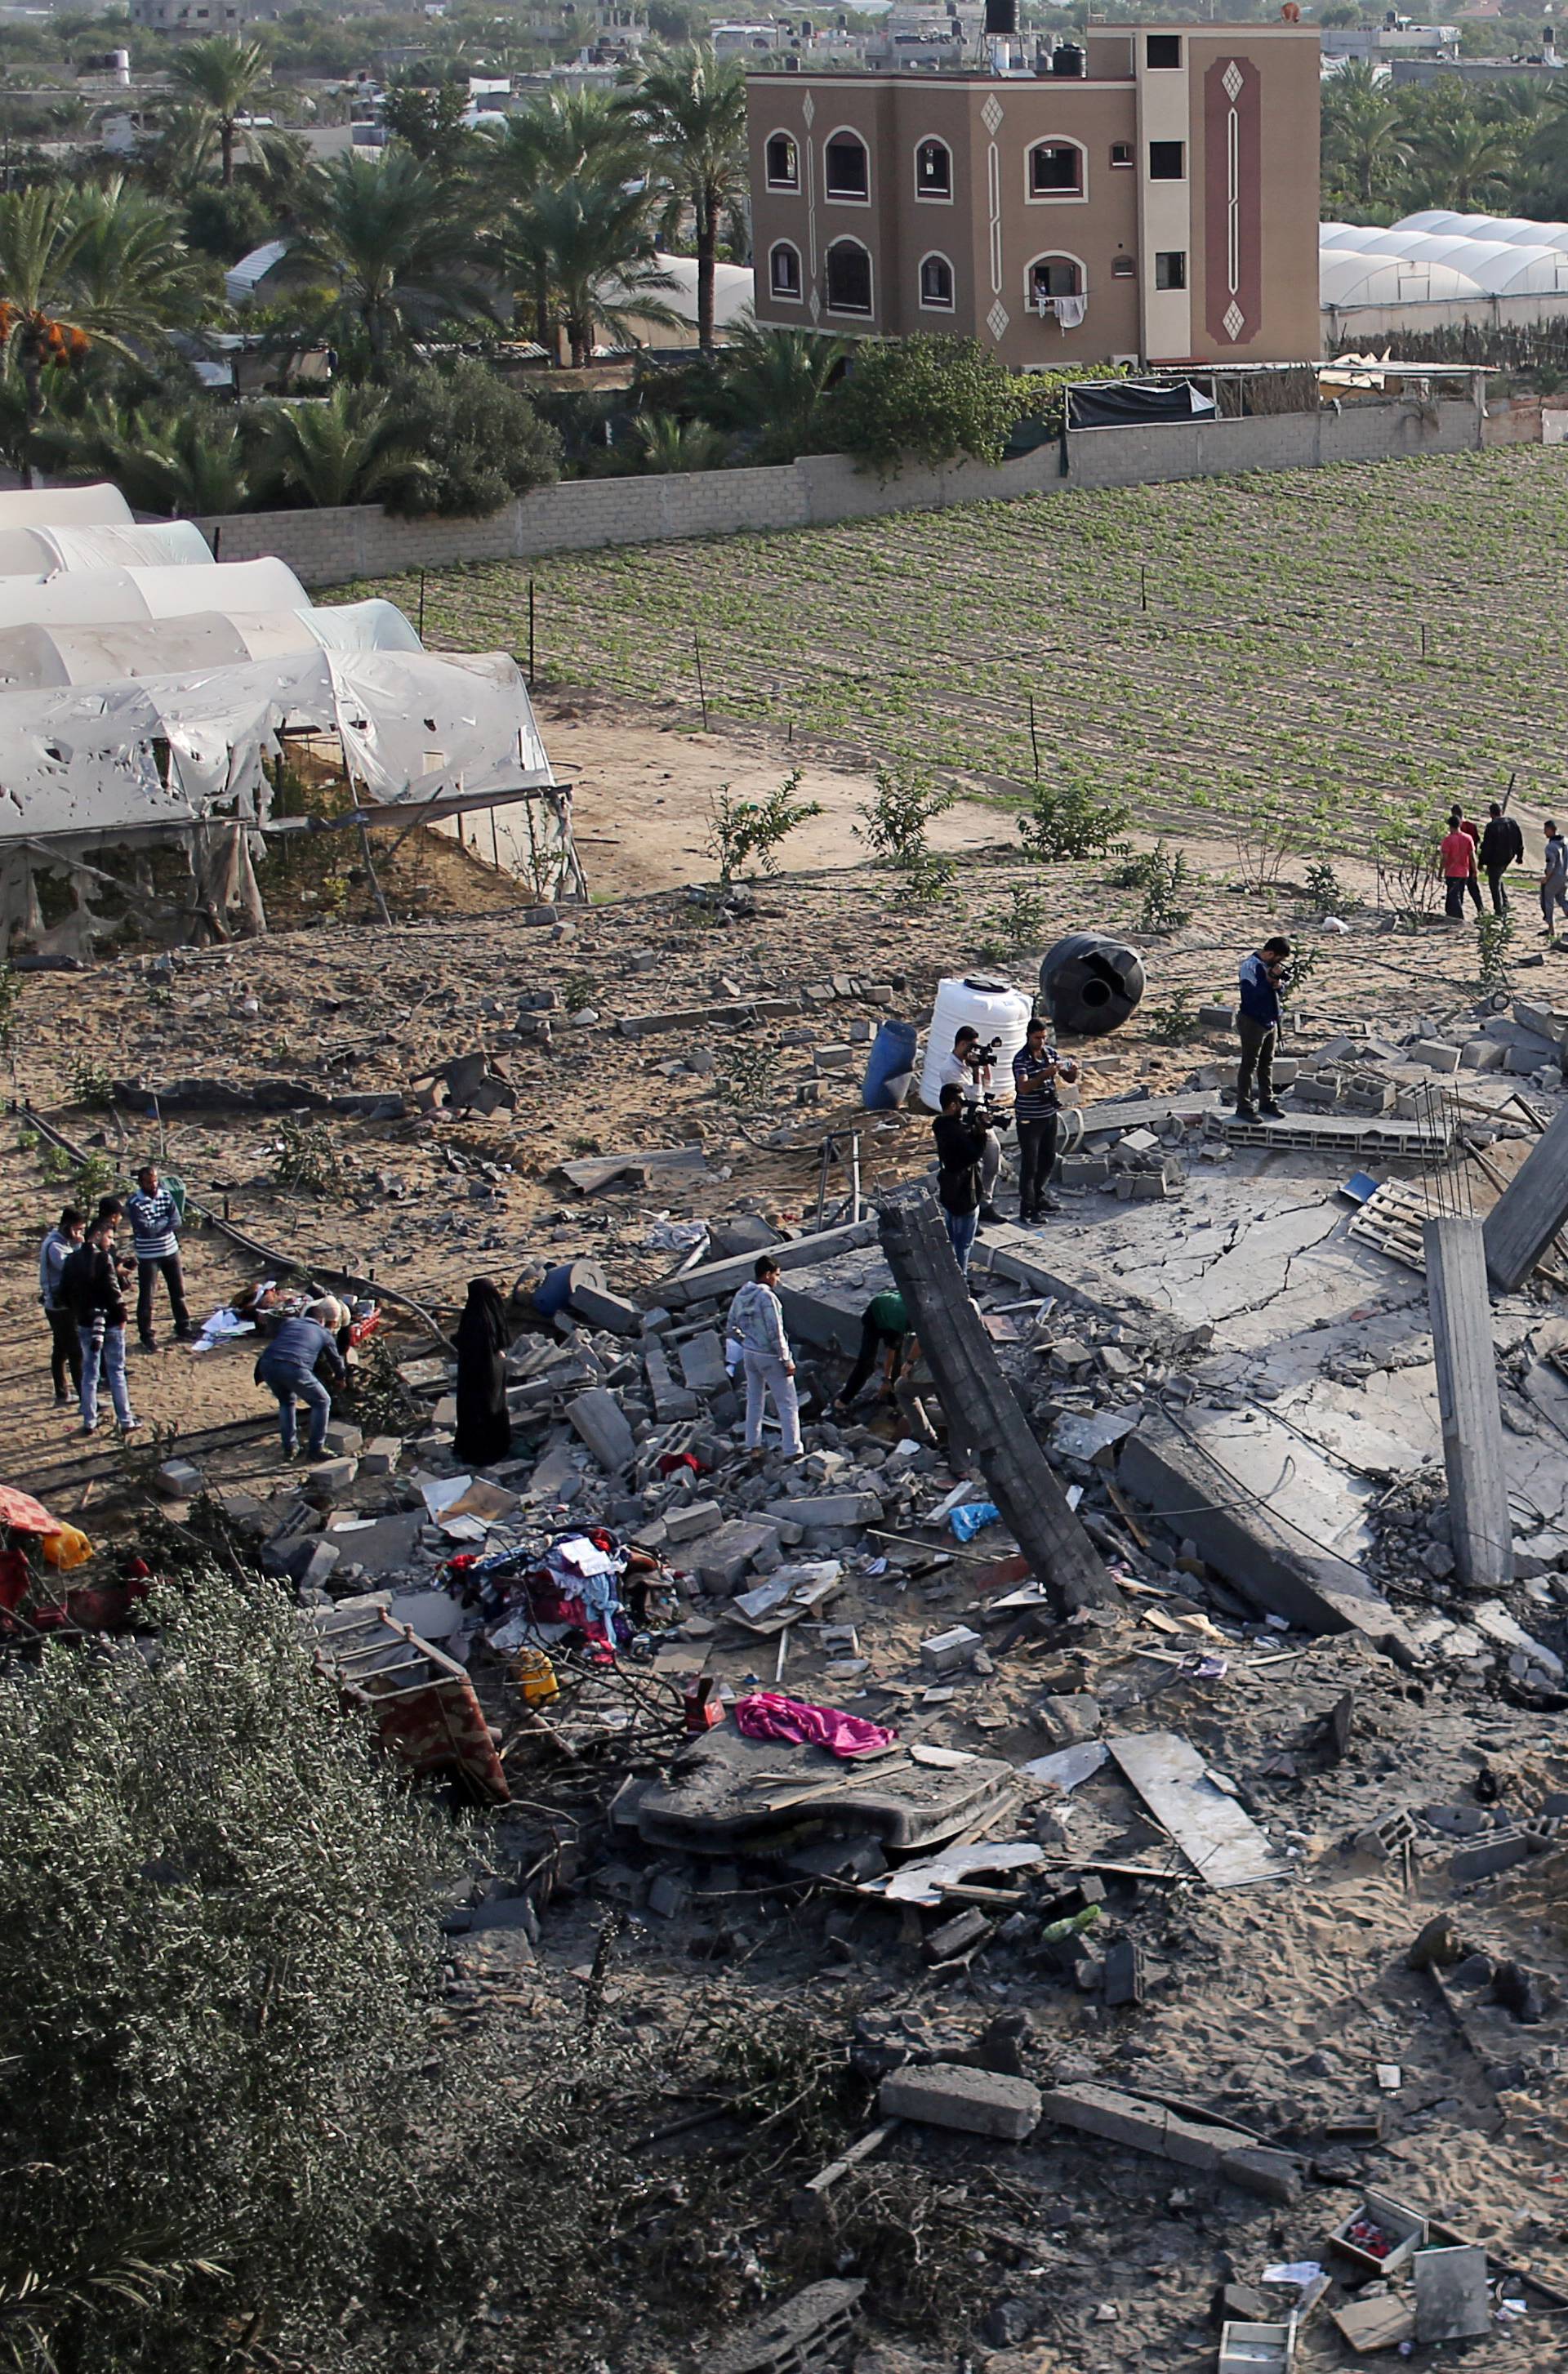 Palestinians gather around the remains of a house destroyed in an Israeli air strike in the southern Gaza Strip